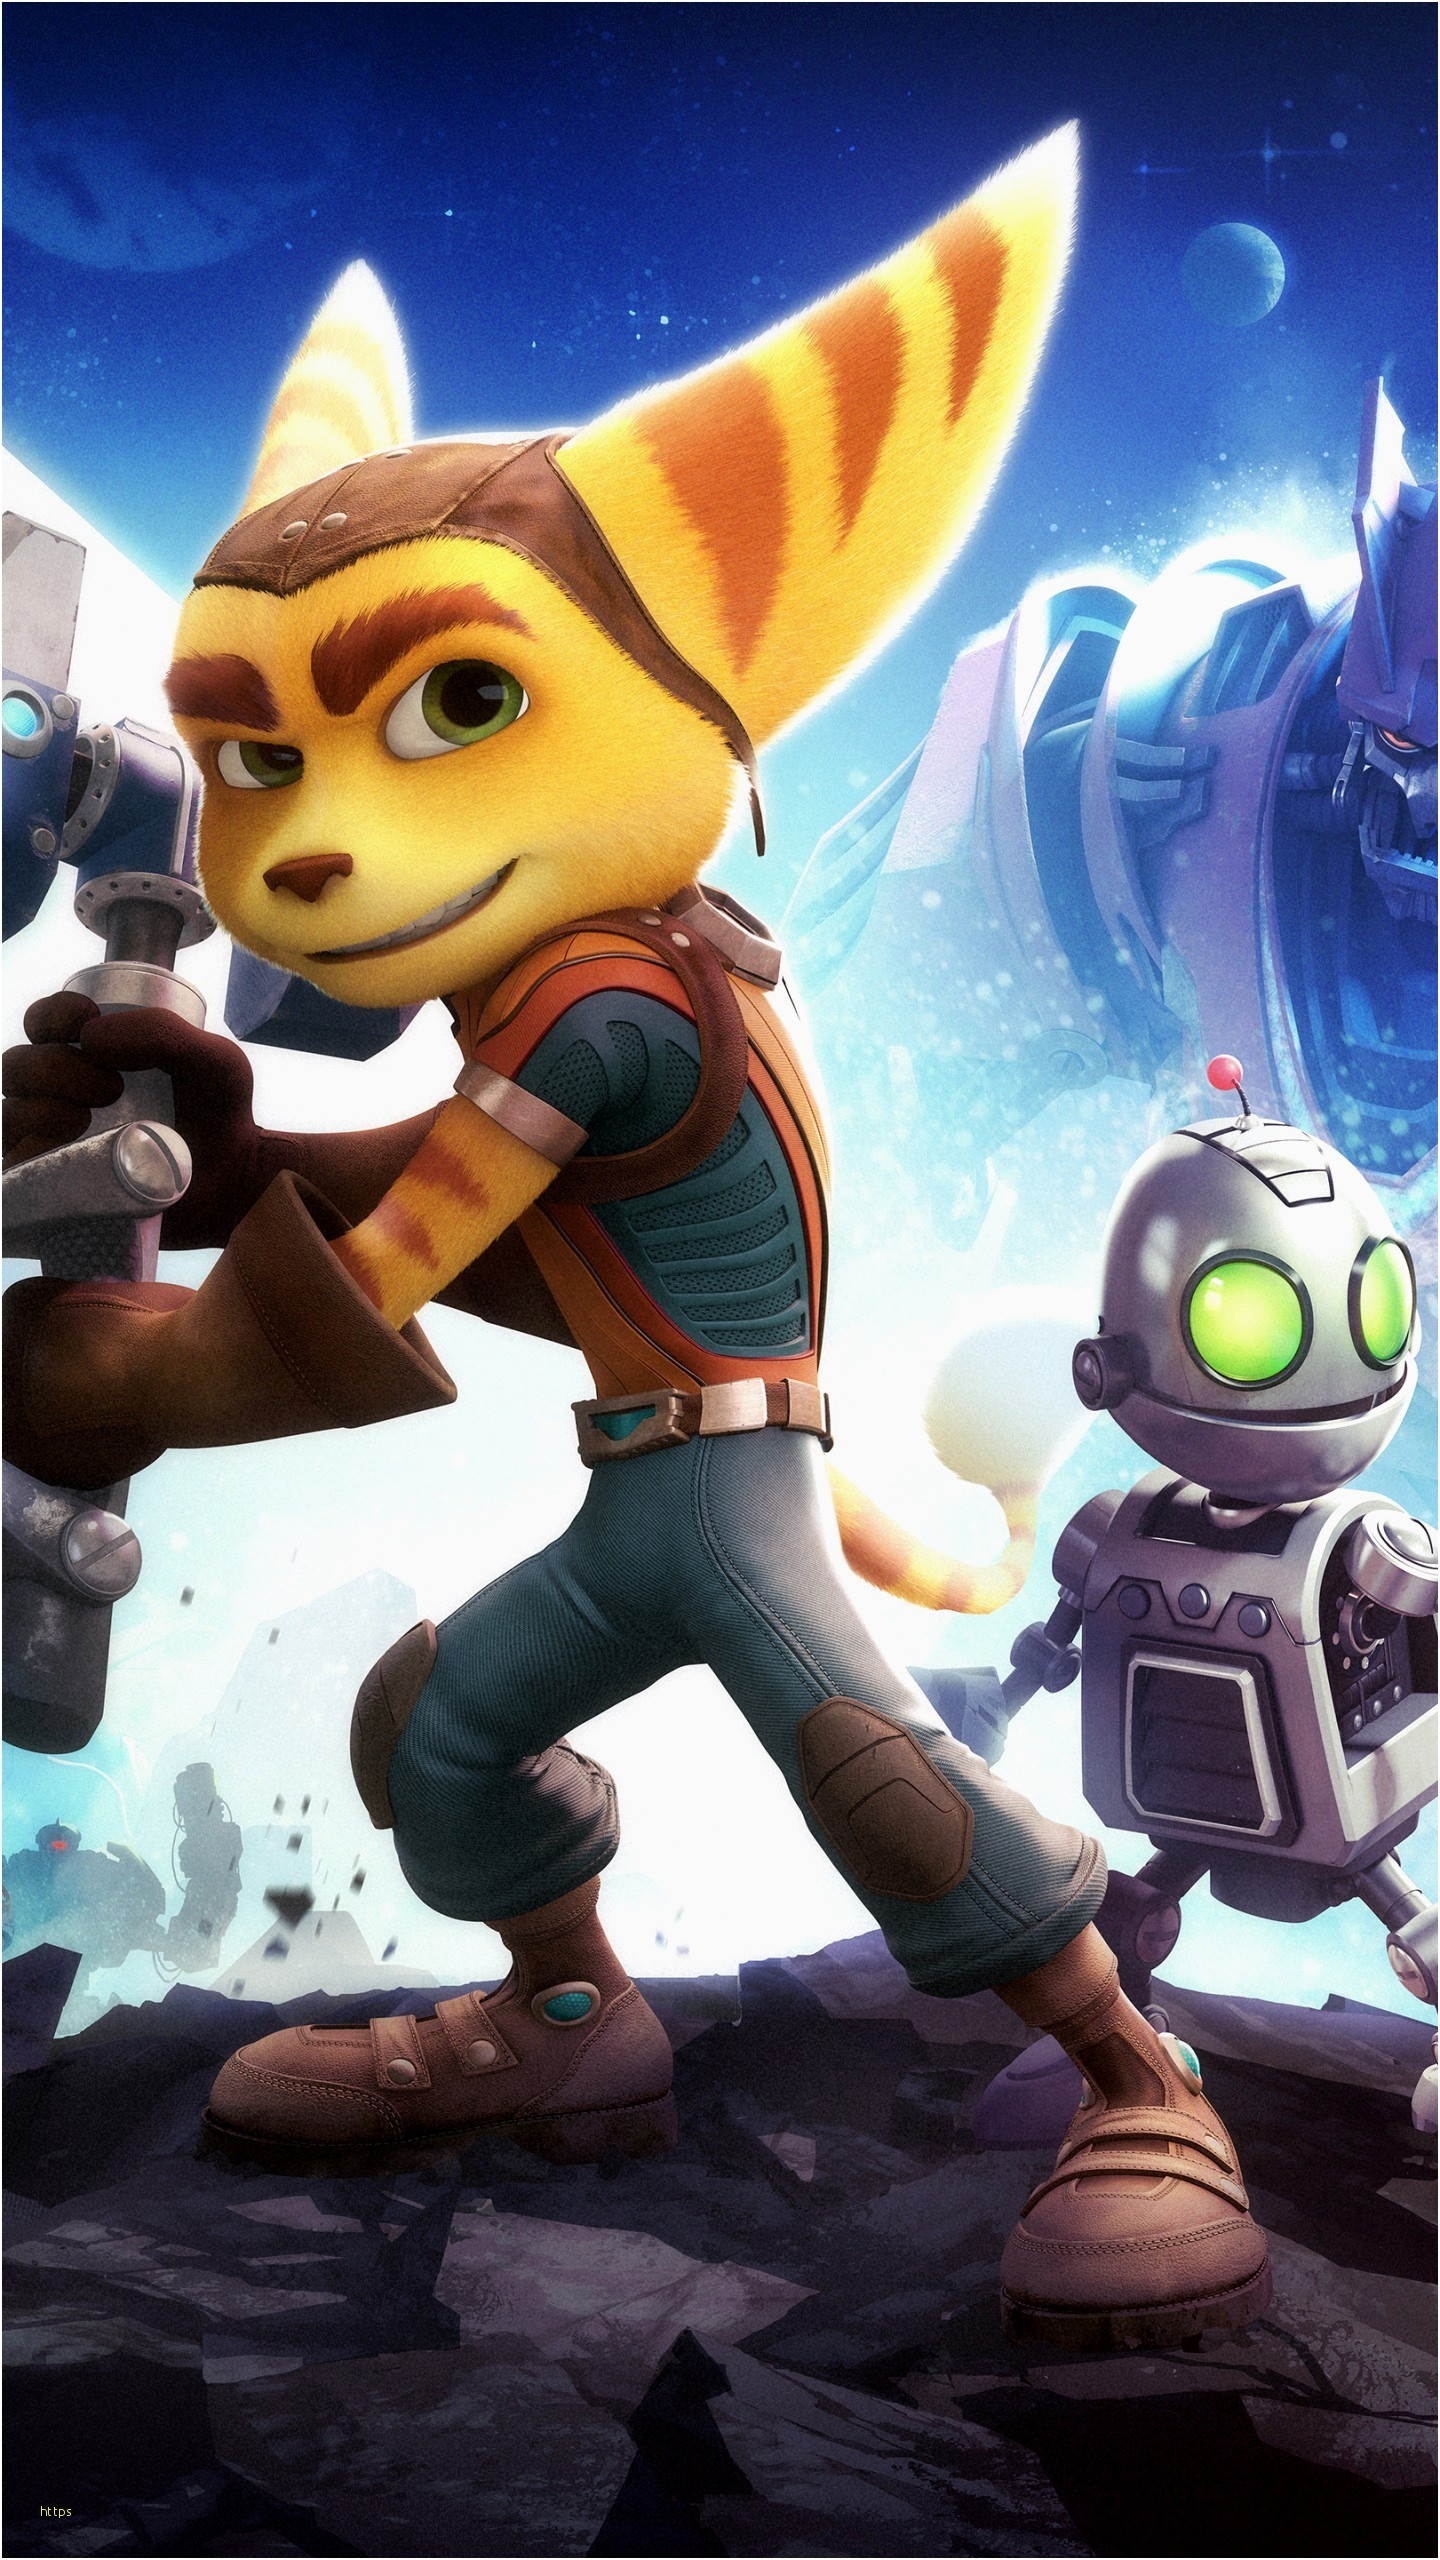 1440x2560 Ratchet and Clank Wallpaper Unique Ratchet and Clank Wallpaper iPhone Ã¢Å“  Many Hd Wallpaper